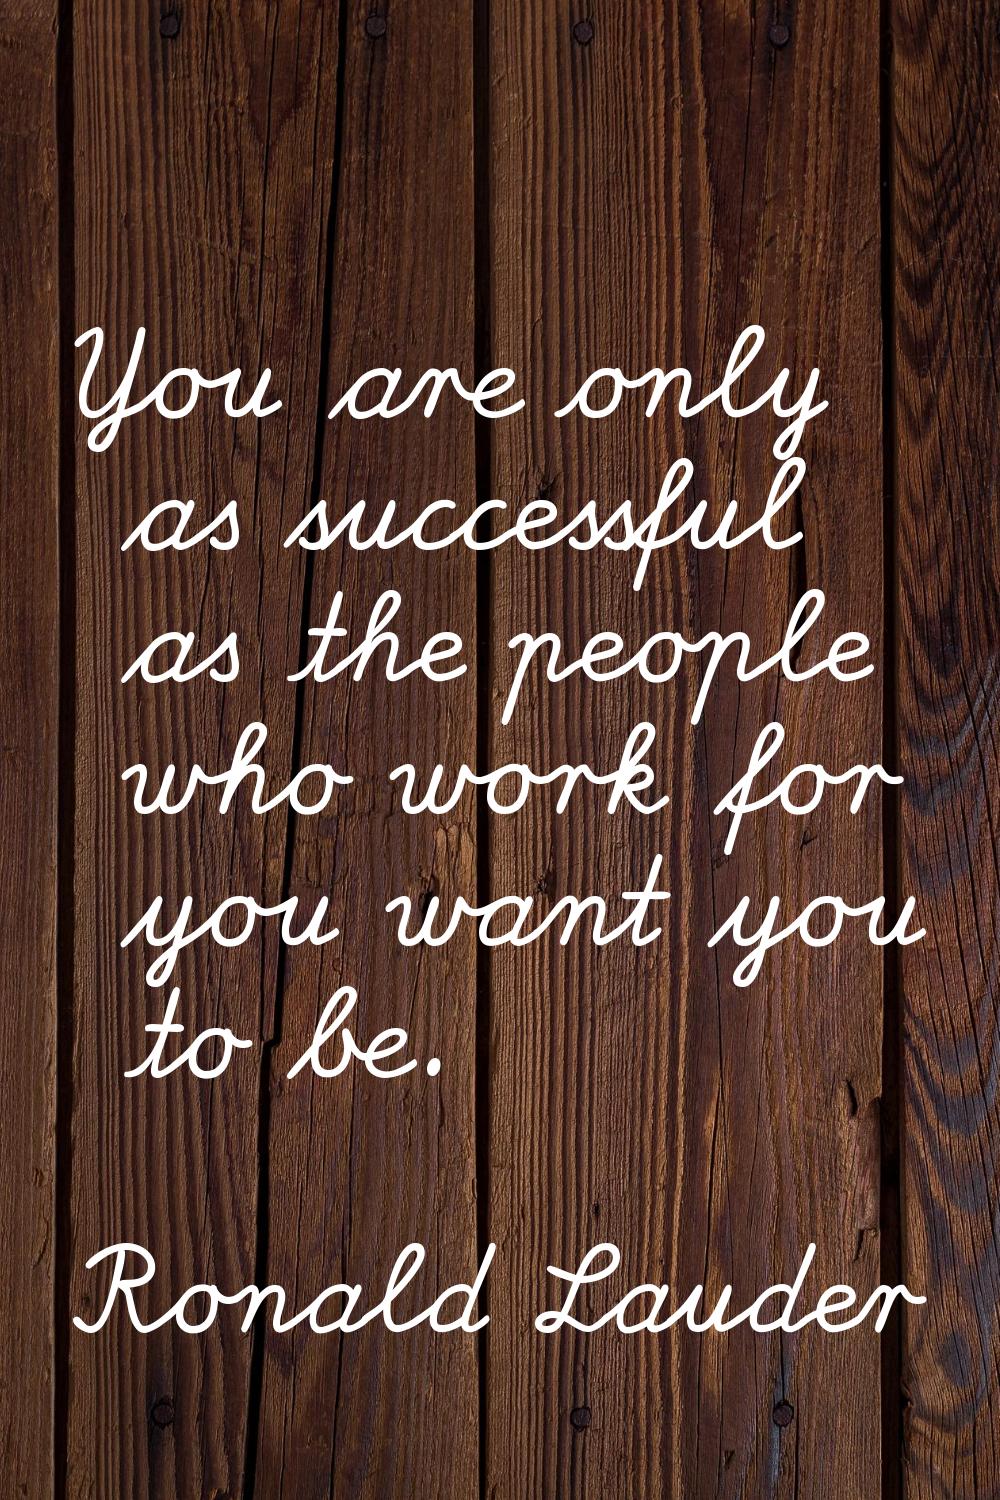 You are only as successful as the people who work for you want you to be.